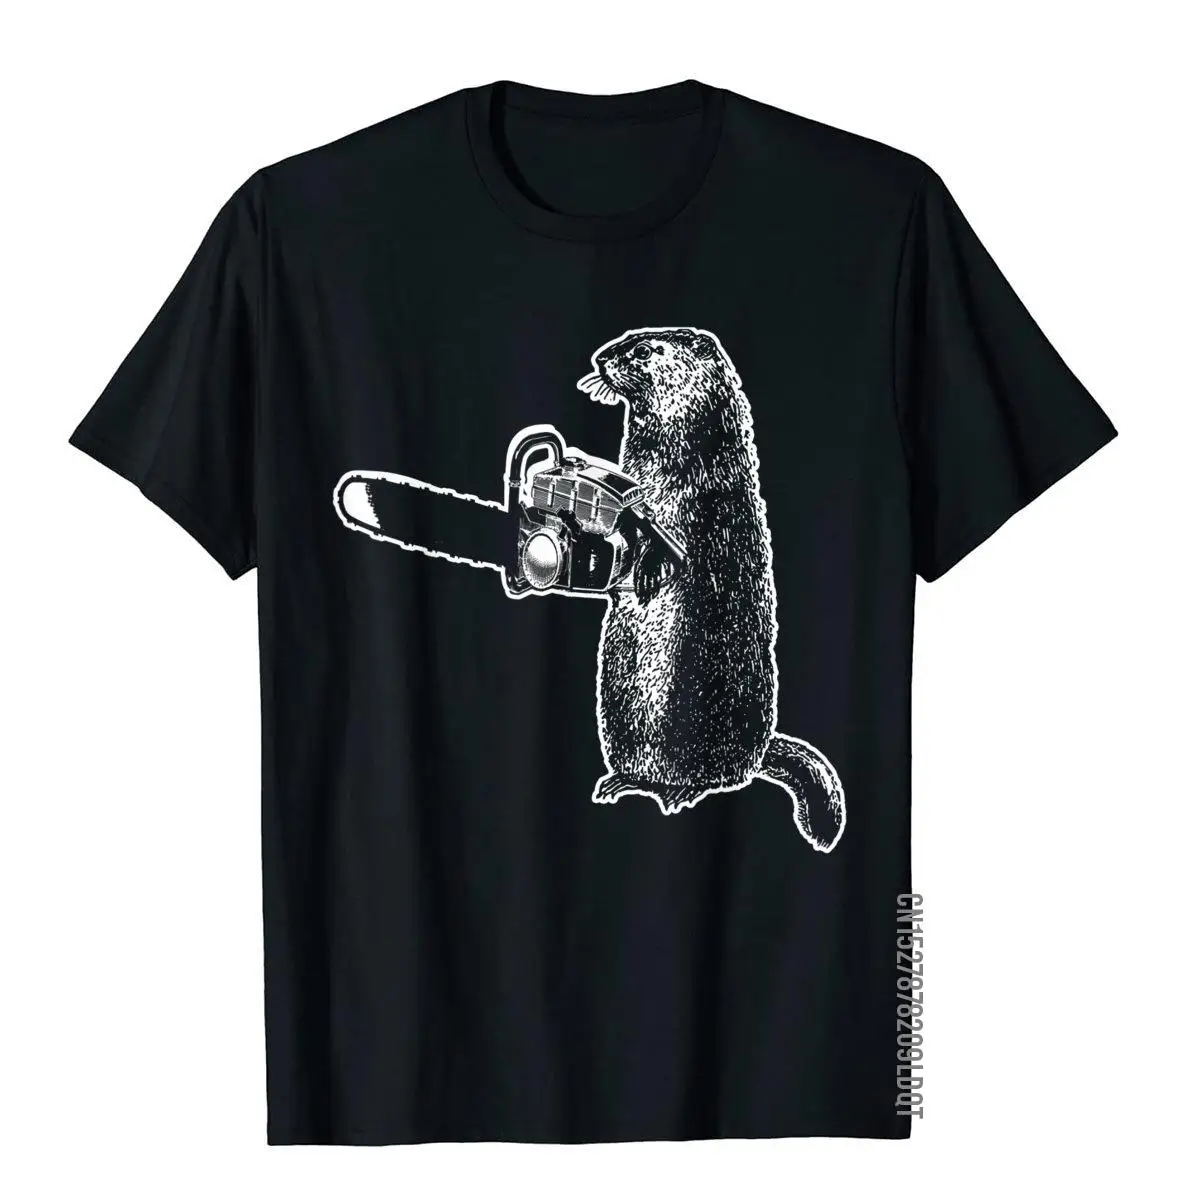 Funny Shirt Woodchuck Groundhog Day Could Chainsaw Wood Tee__B6428black